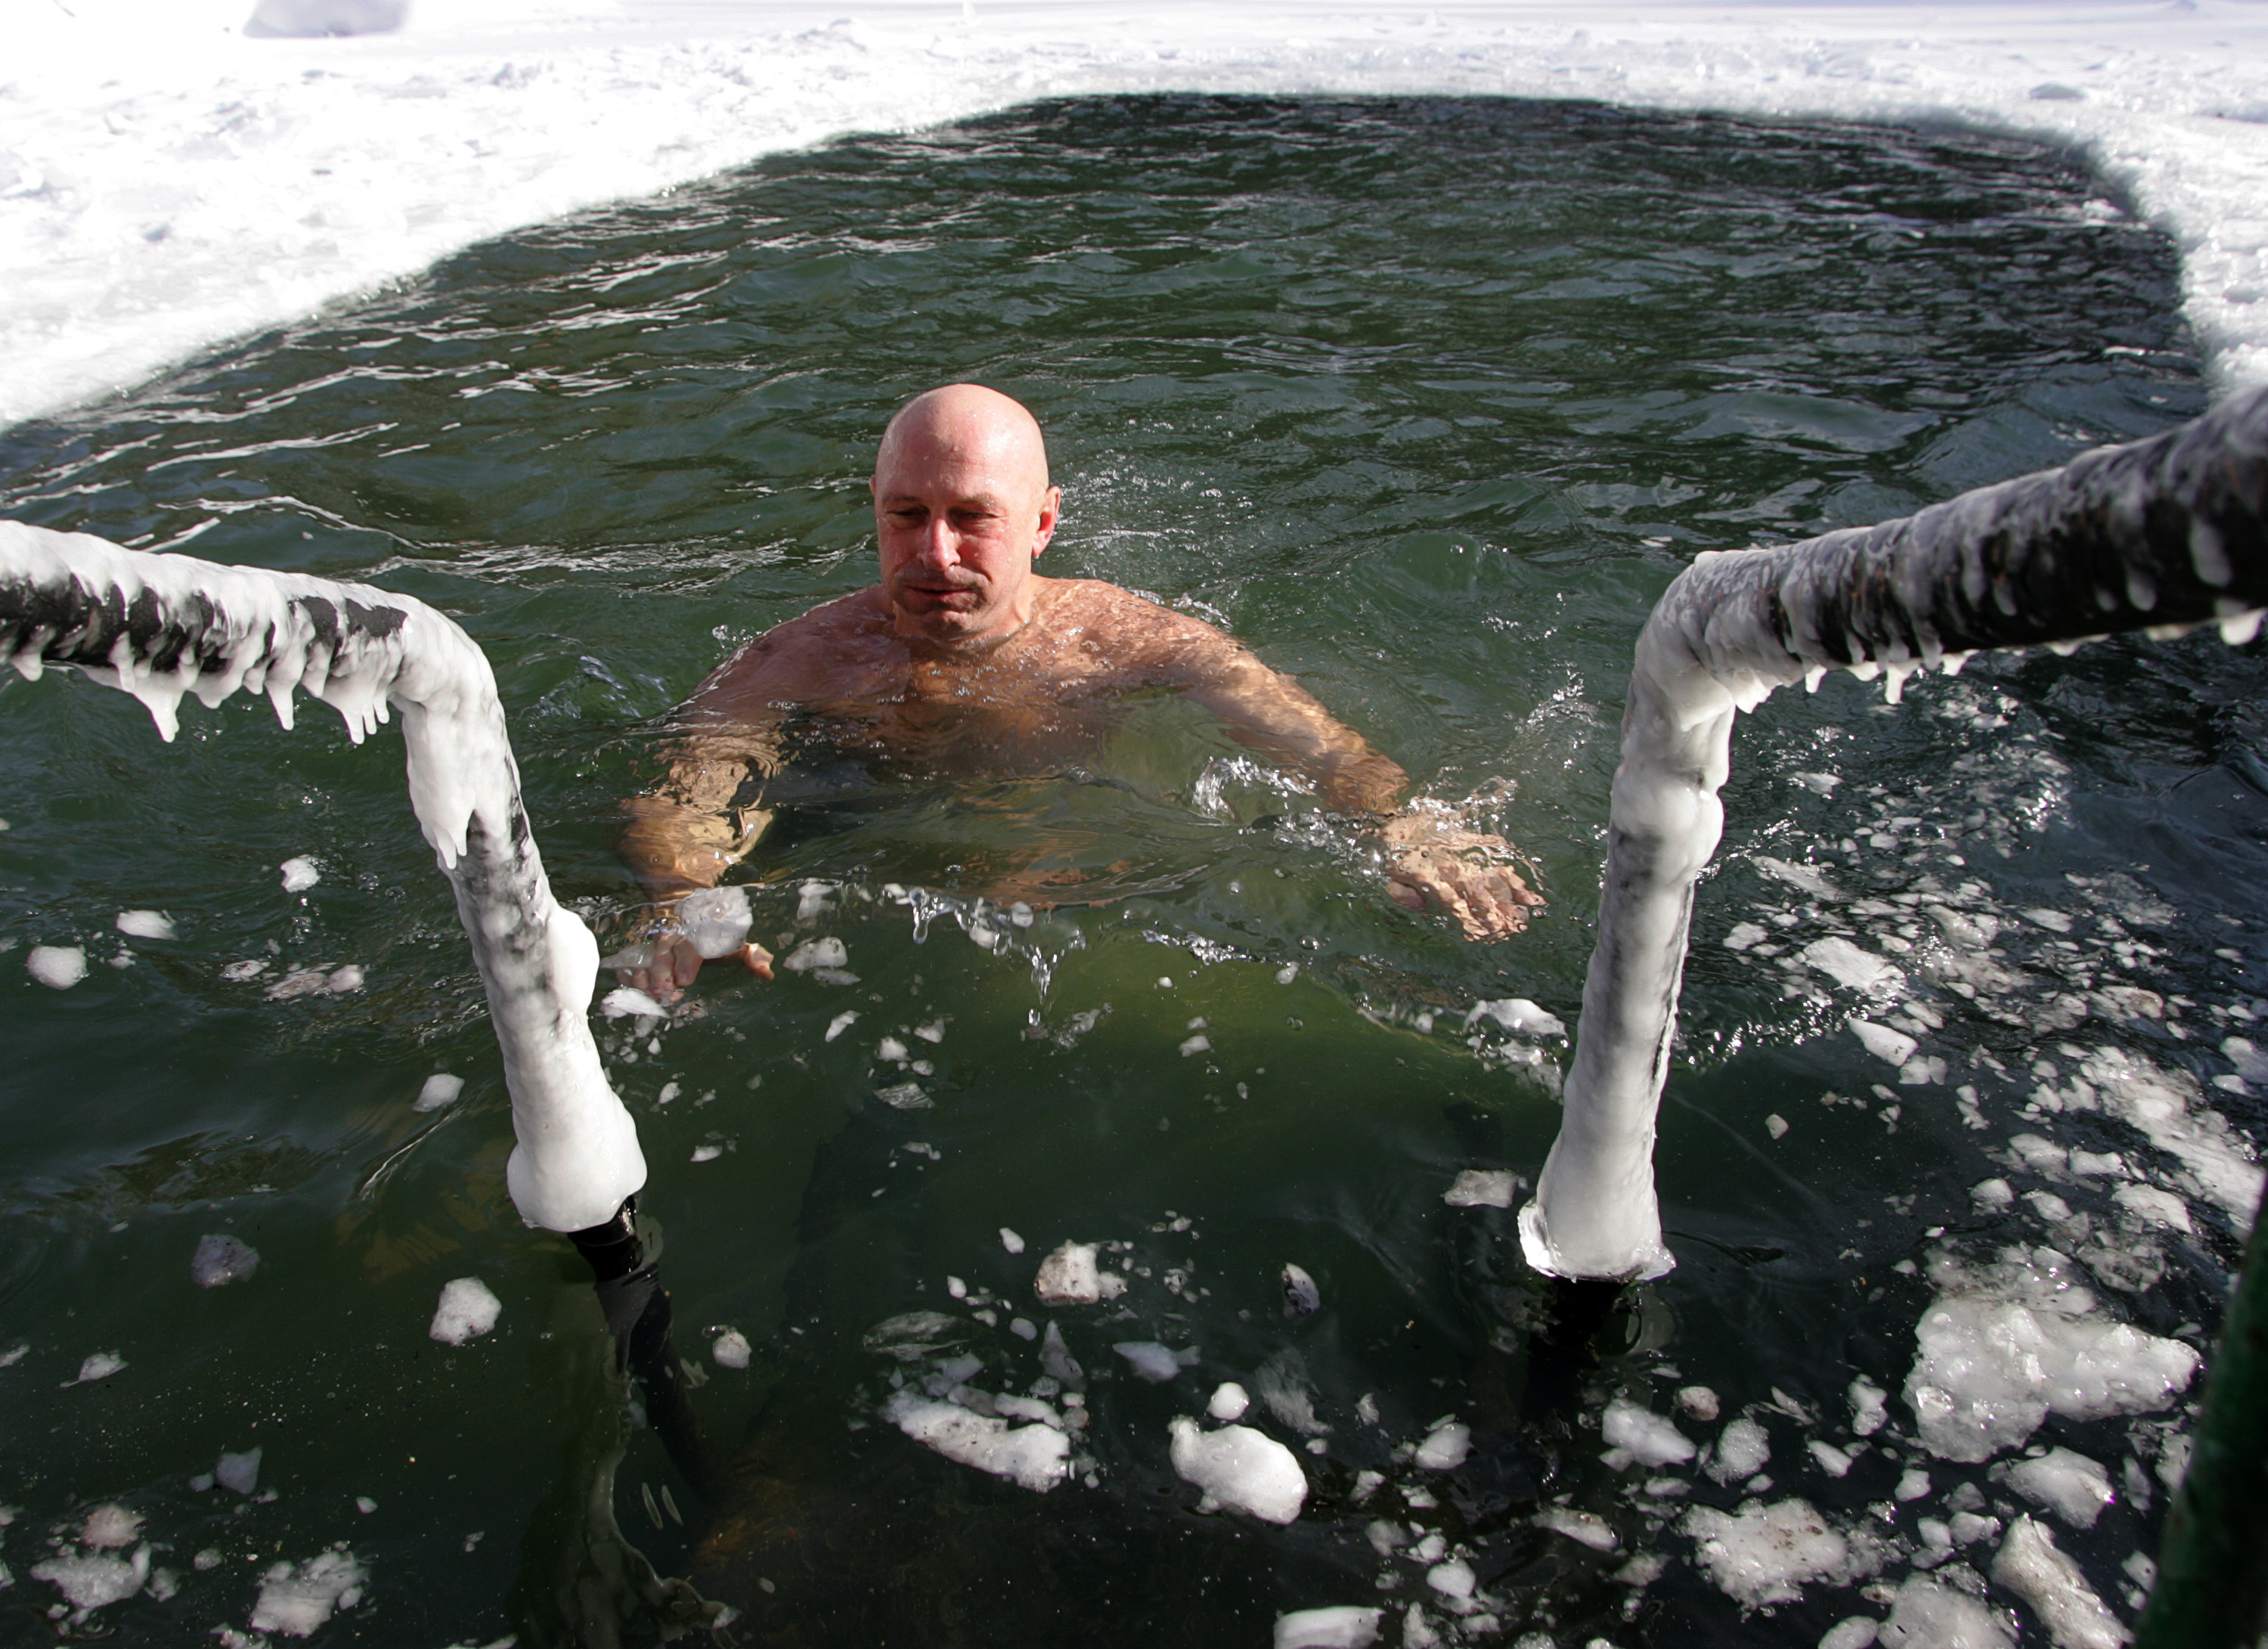 Swimming in cold temperatures can reduce inflammatory responses that cause anxiety and depression (Tima Korodaev/Epsilon/Getty Images)